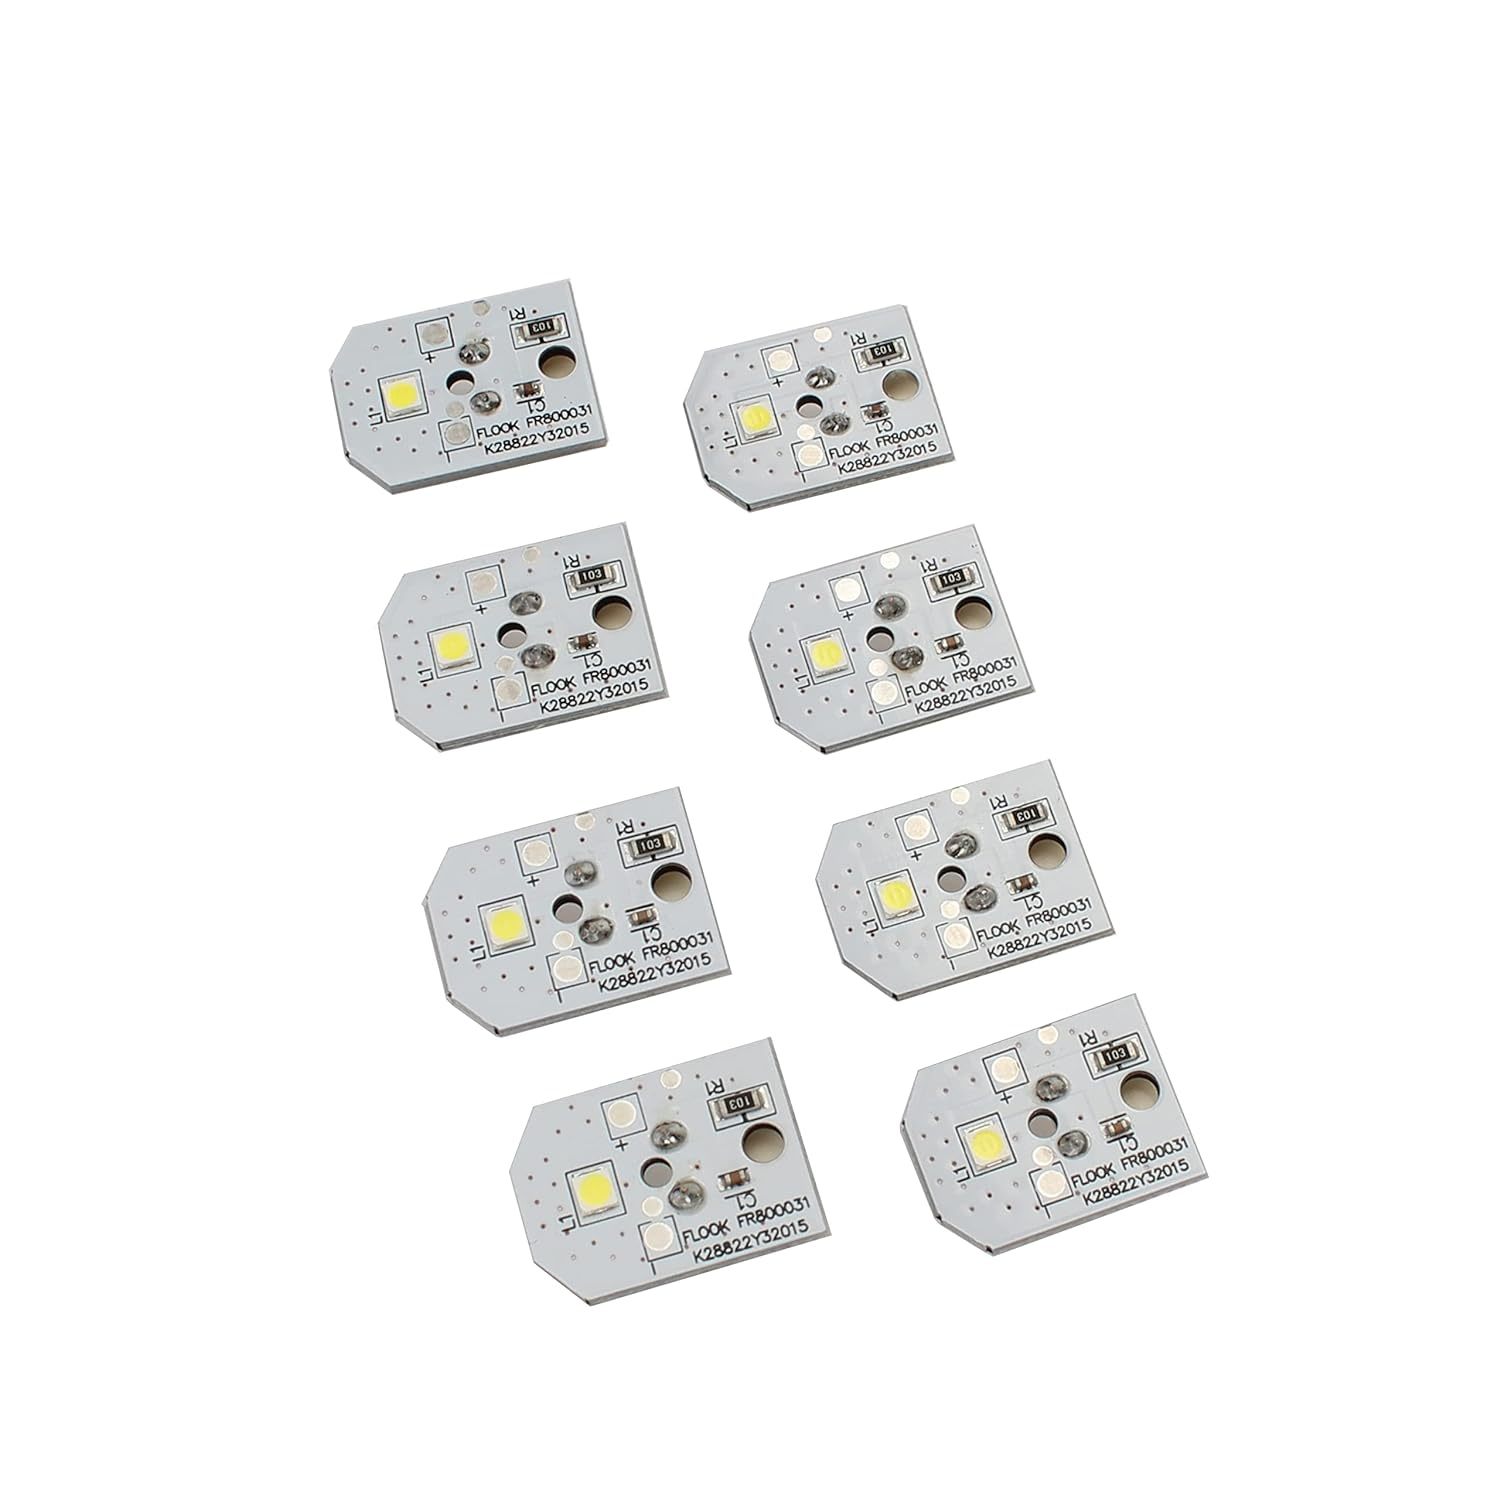  WR55X11132 WR55X26487 WR55X30603 Compatible with GE  Refrigerator LED Light : Appliances